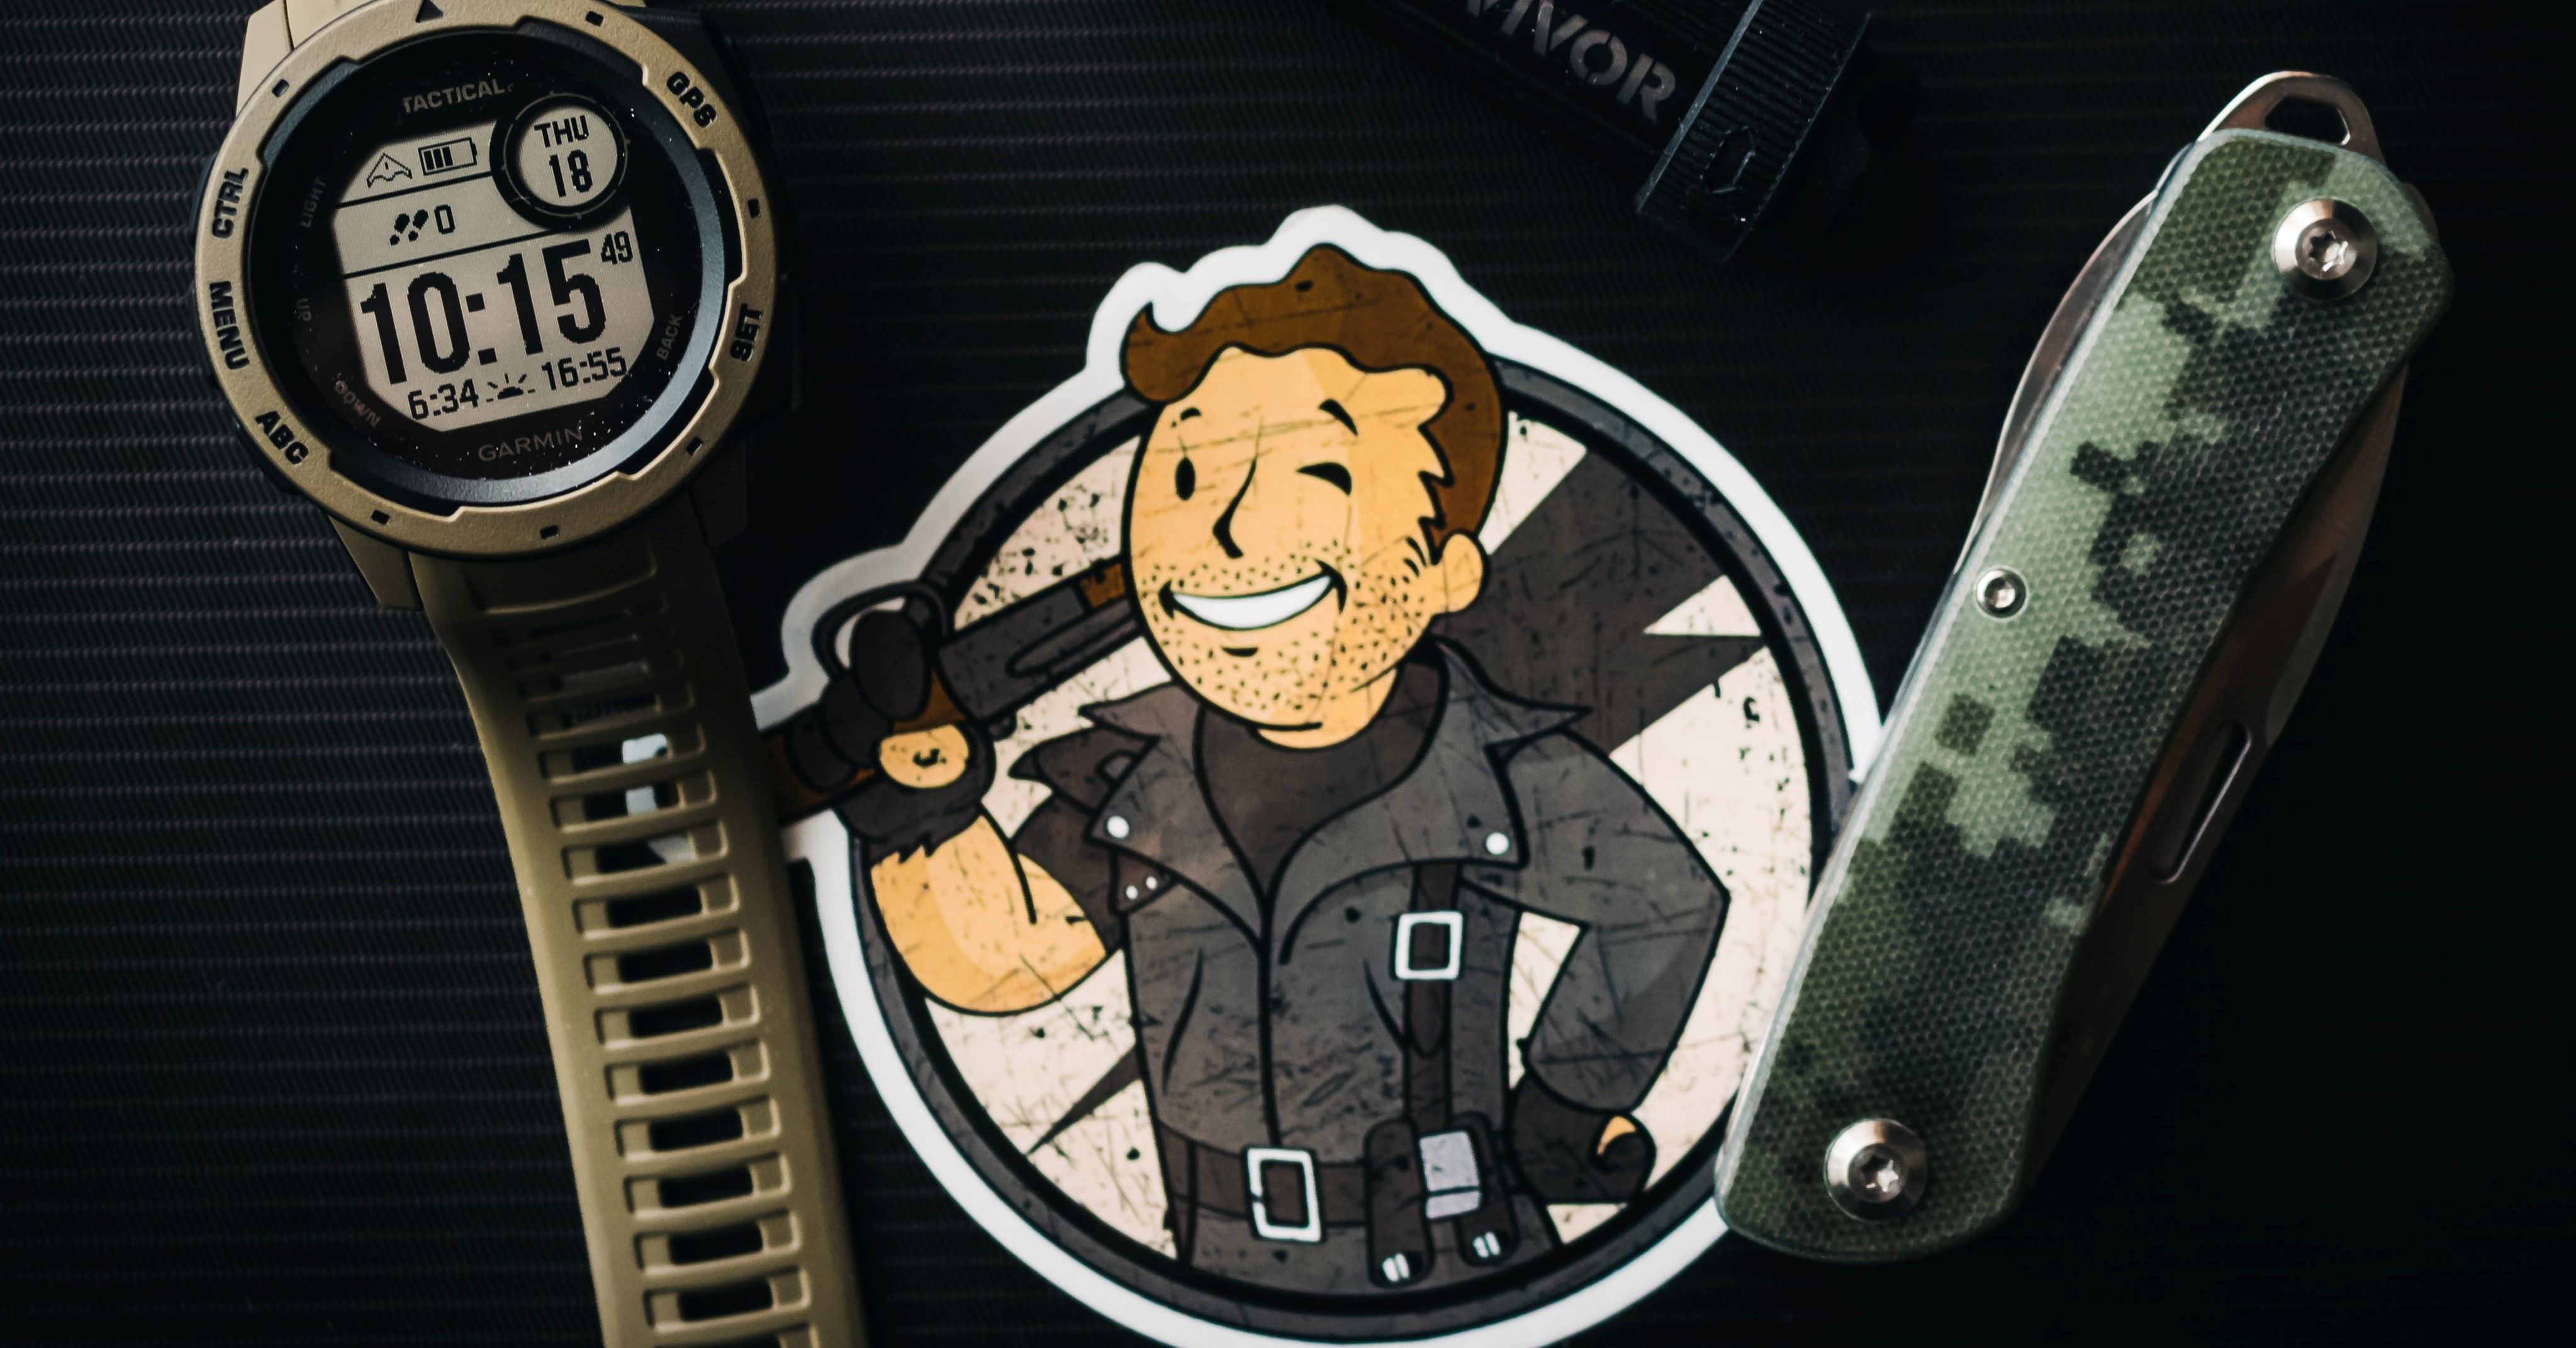 An image of Pip Boy from Fallout surrounded by survivalist equipment 